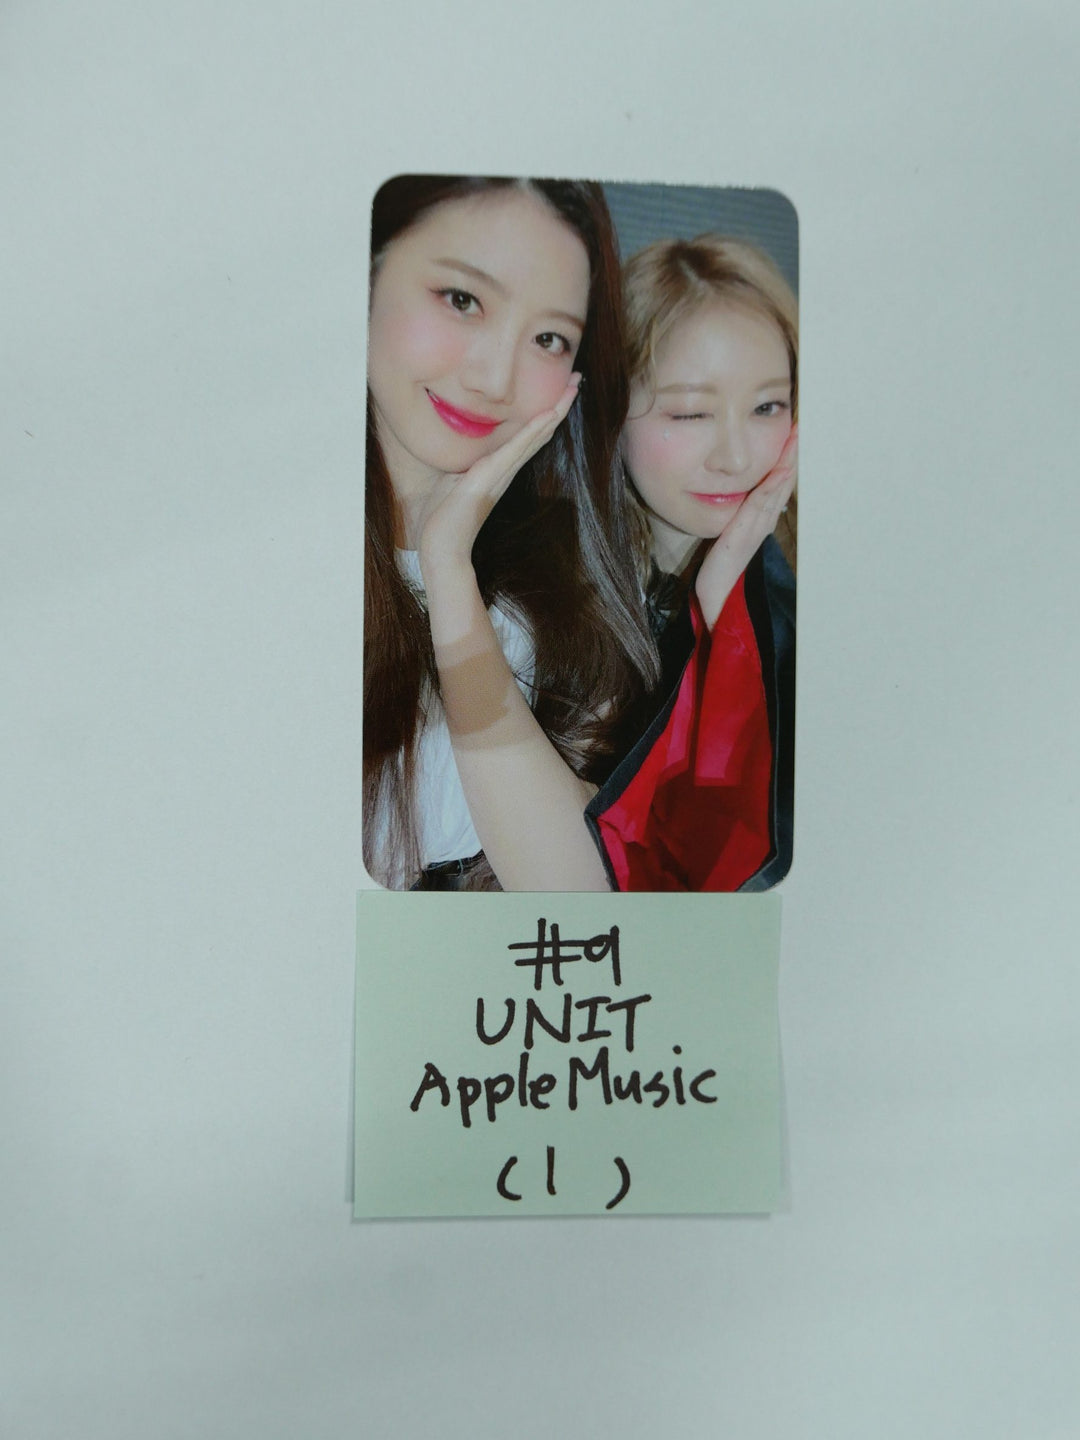 Cherry Bullet 'Cherry Wish' - Apple Music Fansign Event Photocard